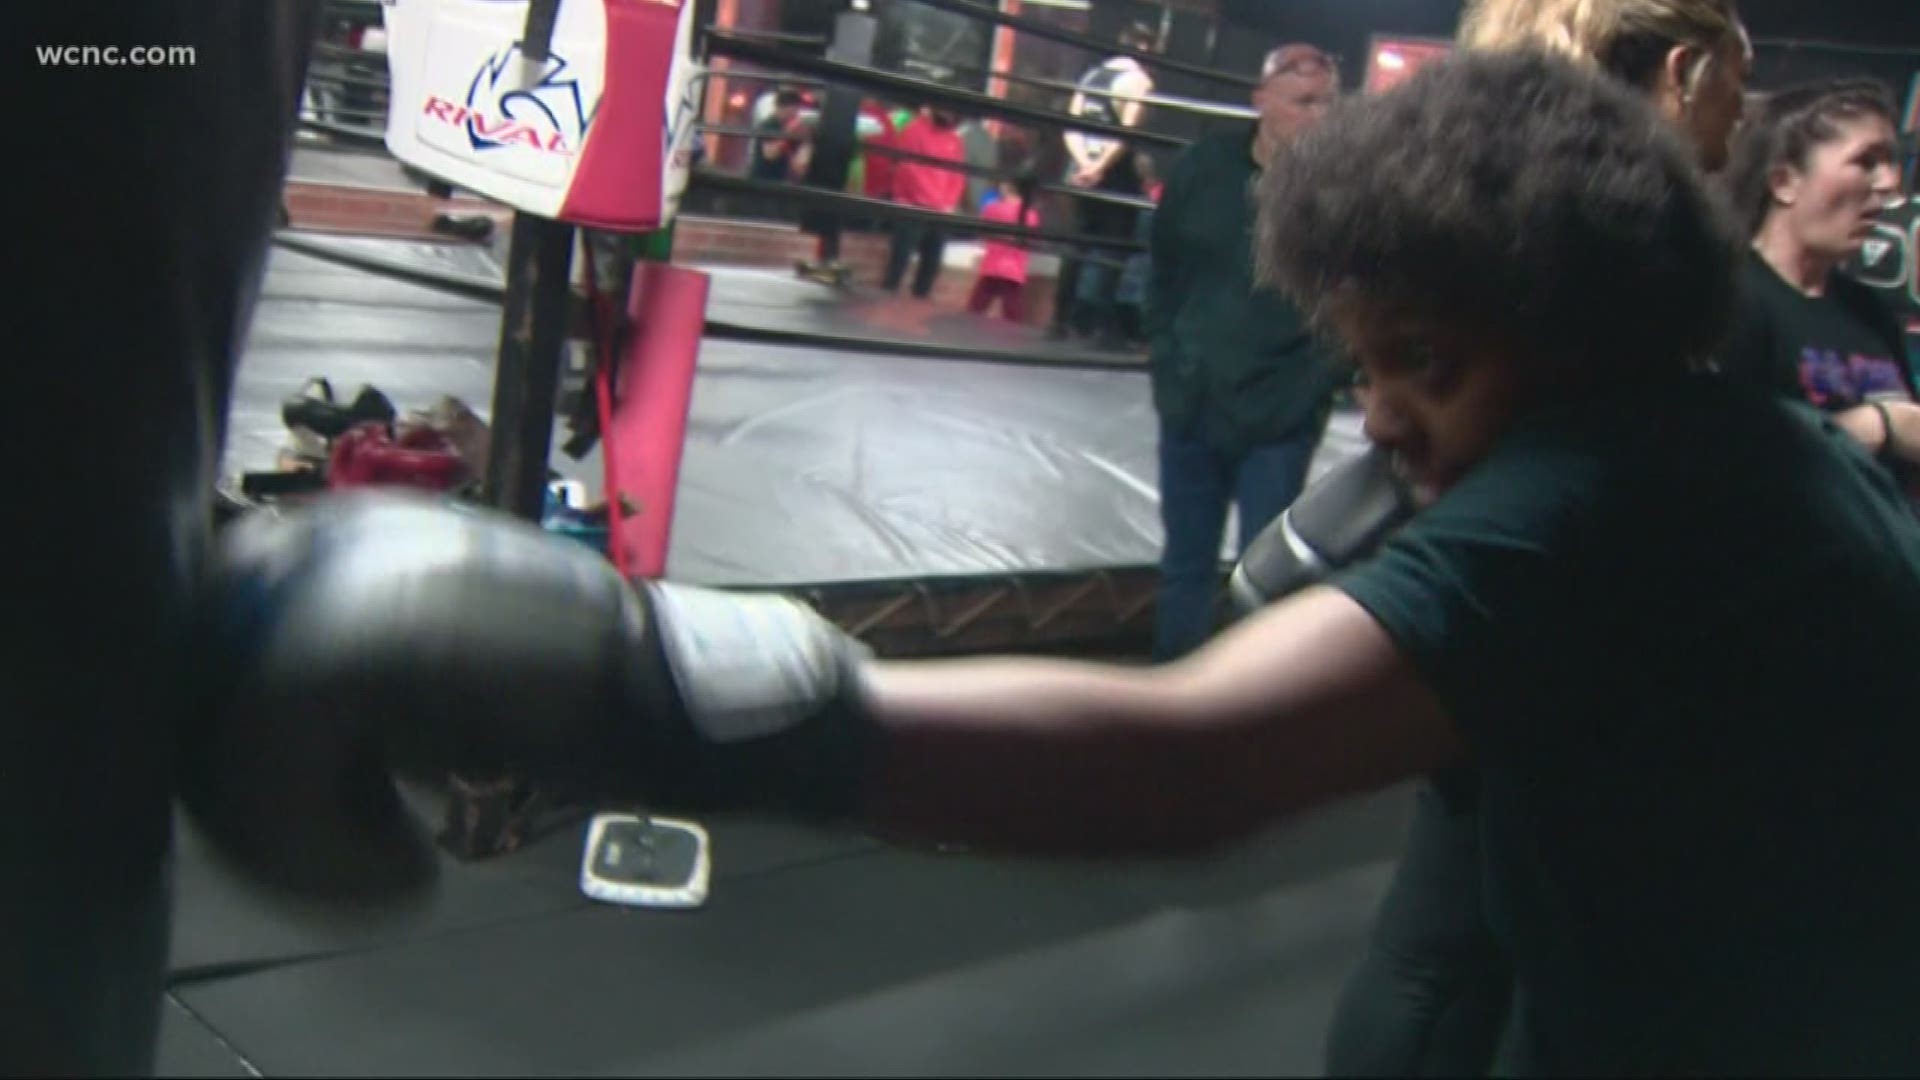 Self Defense Classes Combating Threat Of Sexual Harassment Abuse Bullying And Human Trafficking Wcnc Com